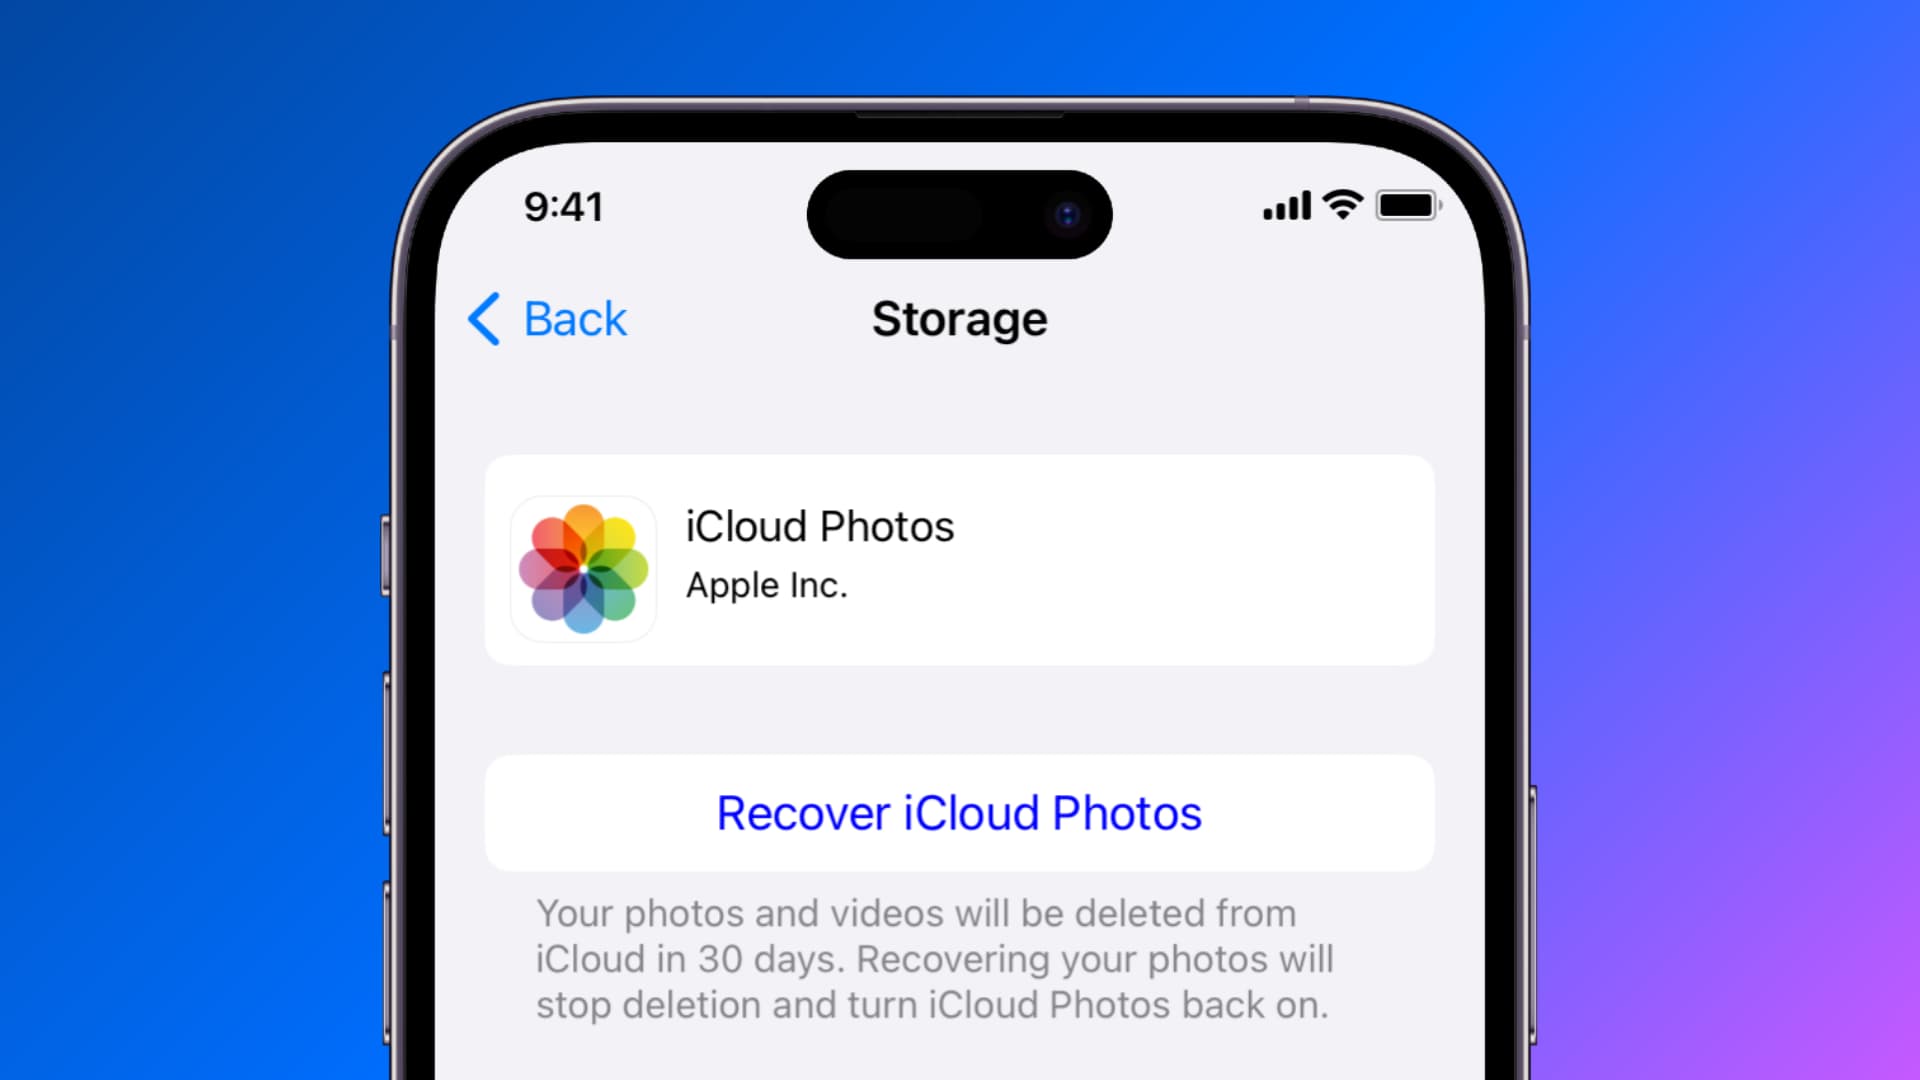 Recover iCloud Photos screen on iPhone